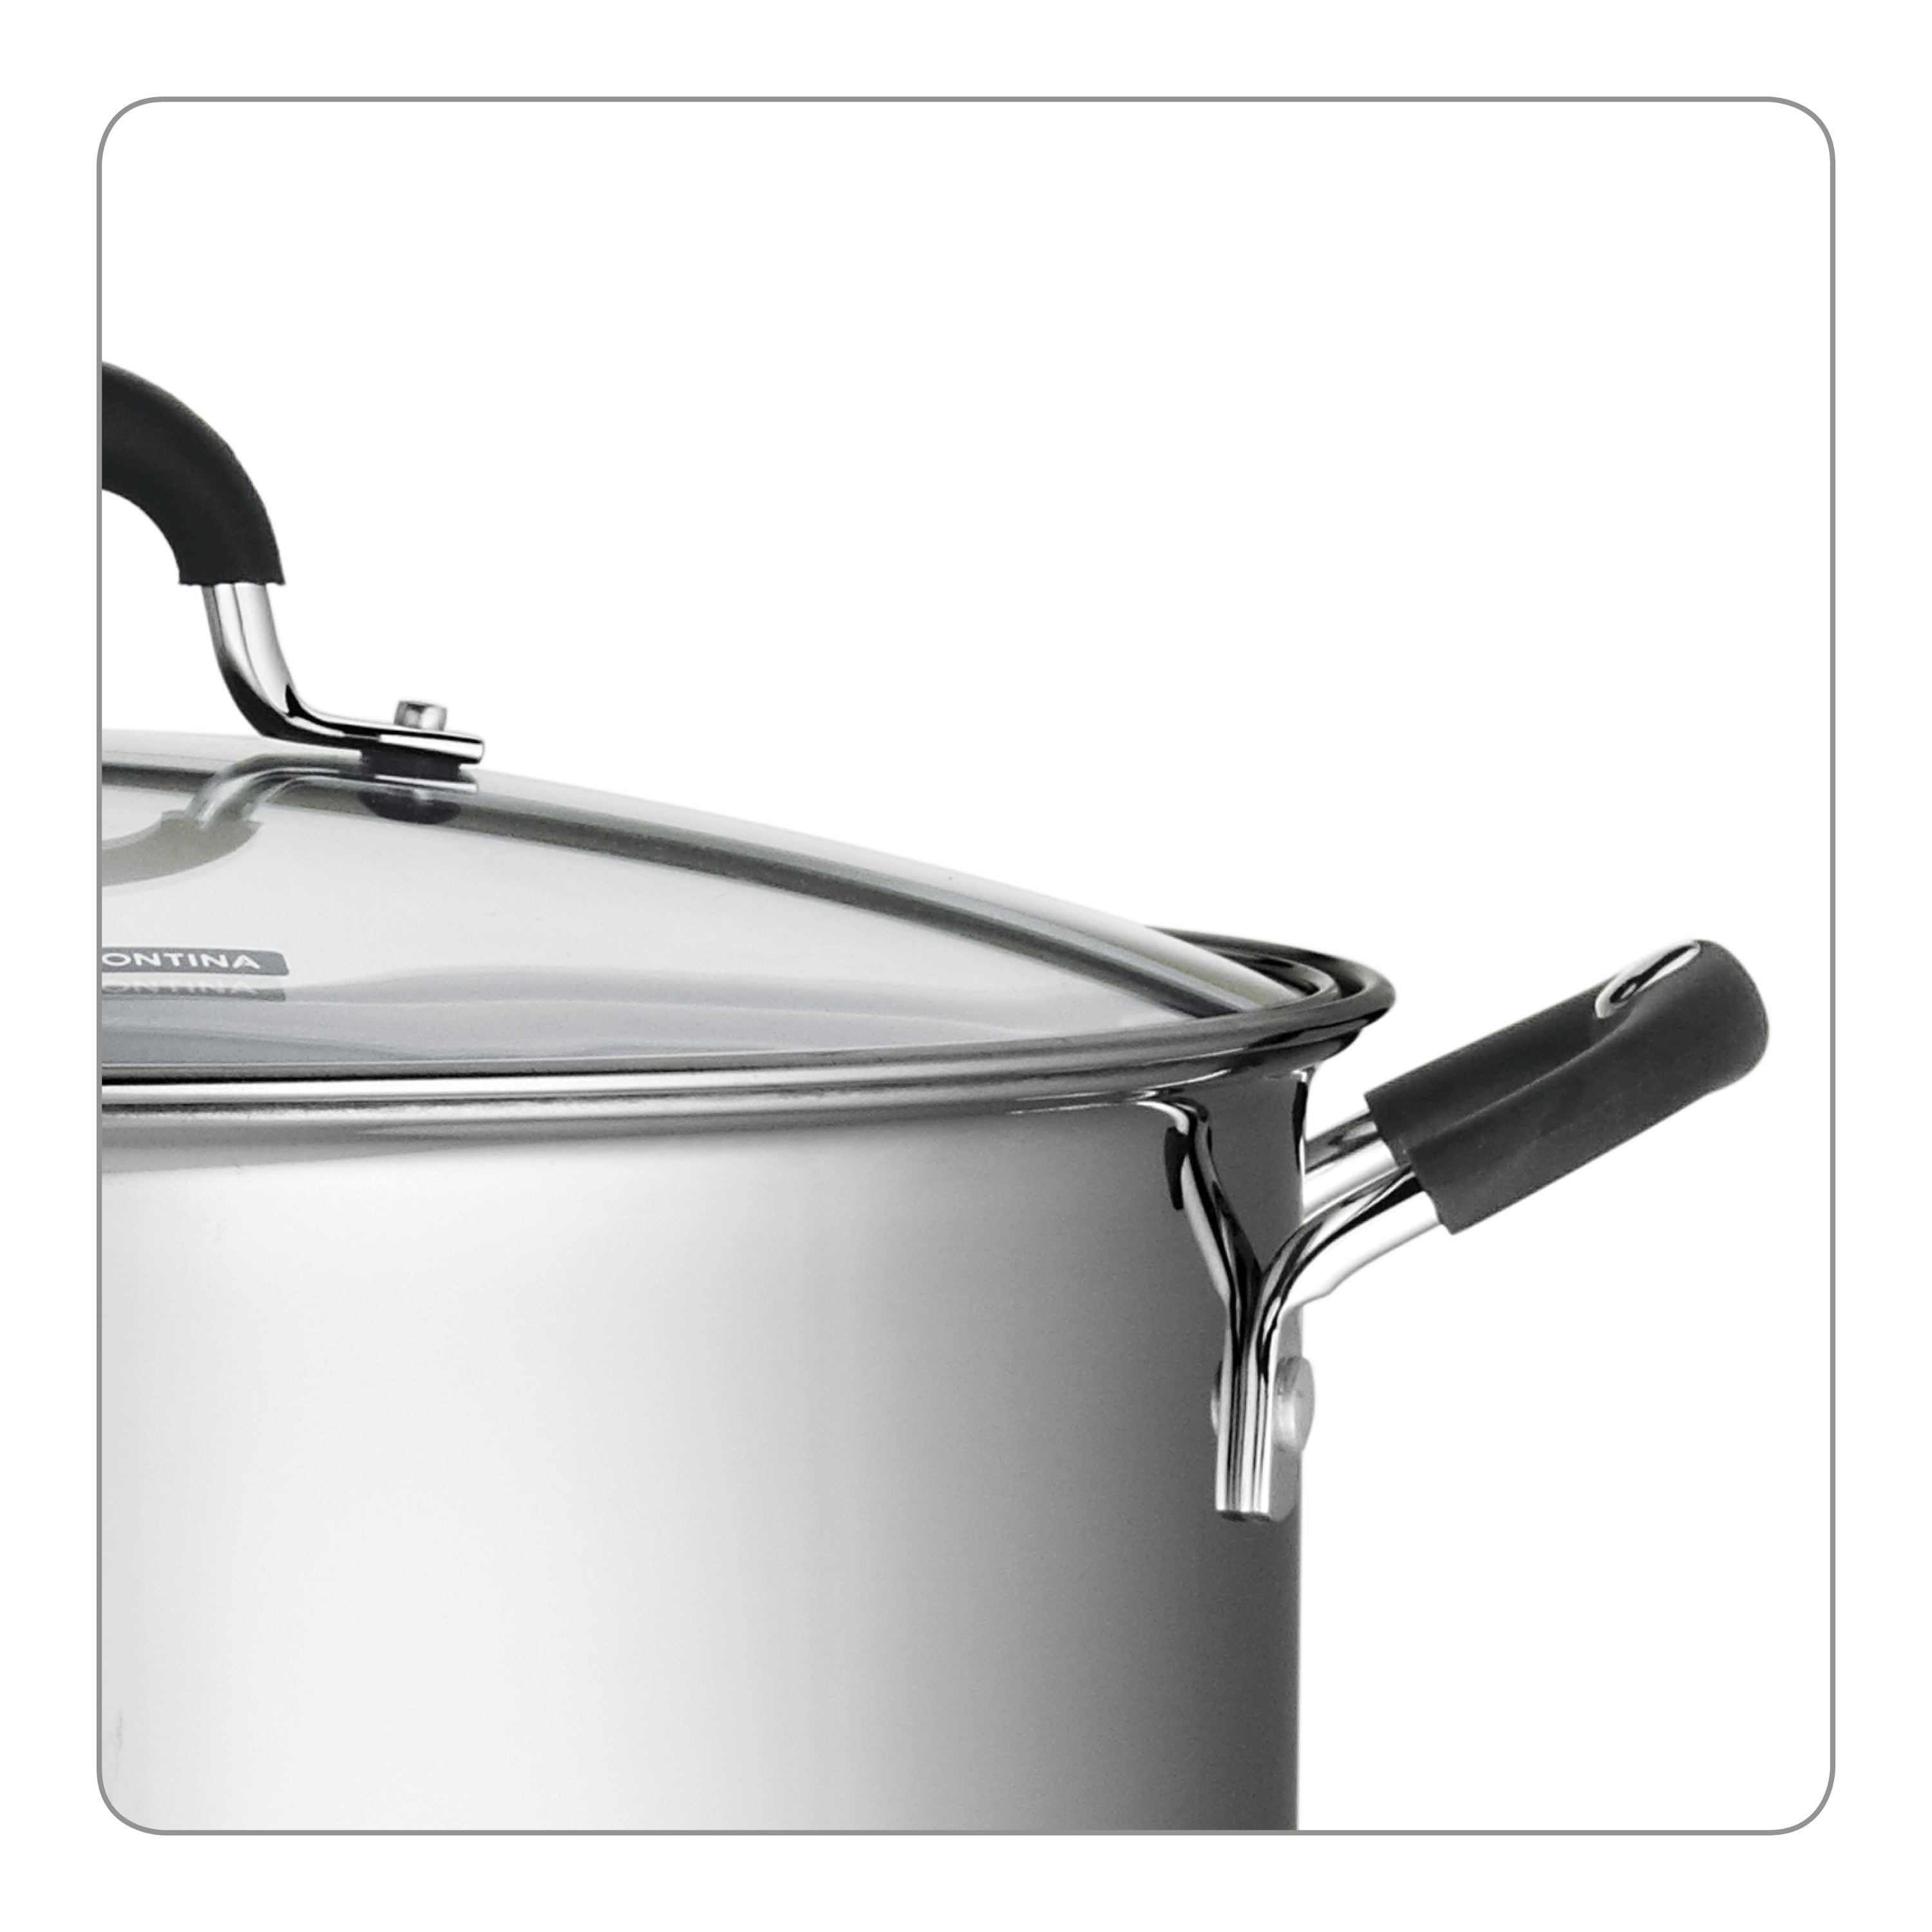 Tramontina 16 qt or 24 quart Stainless Steel Stock Pot with Lid Stockpot  ProLine